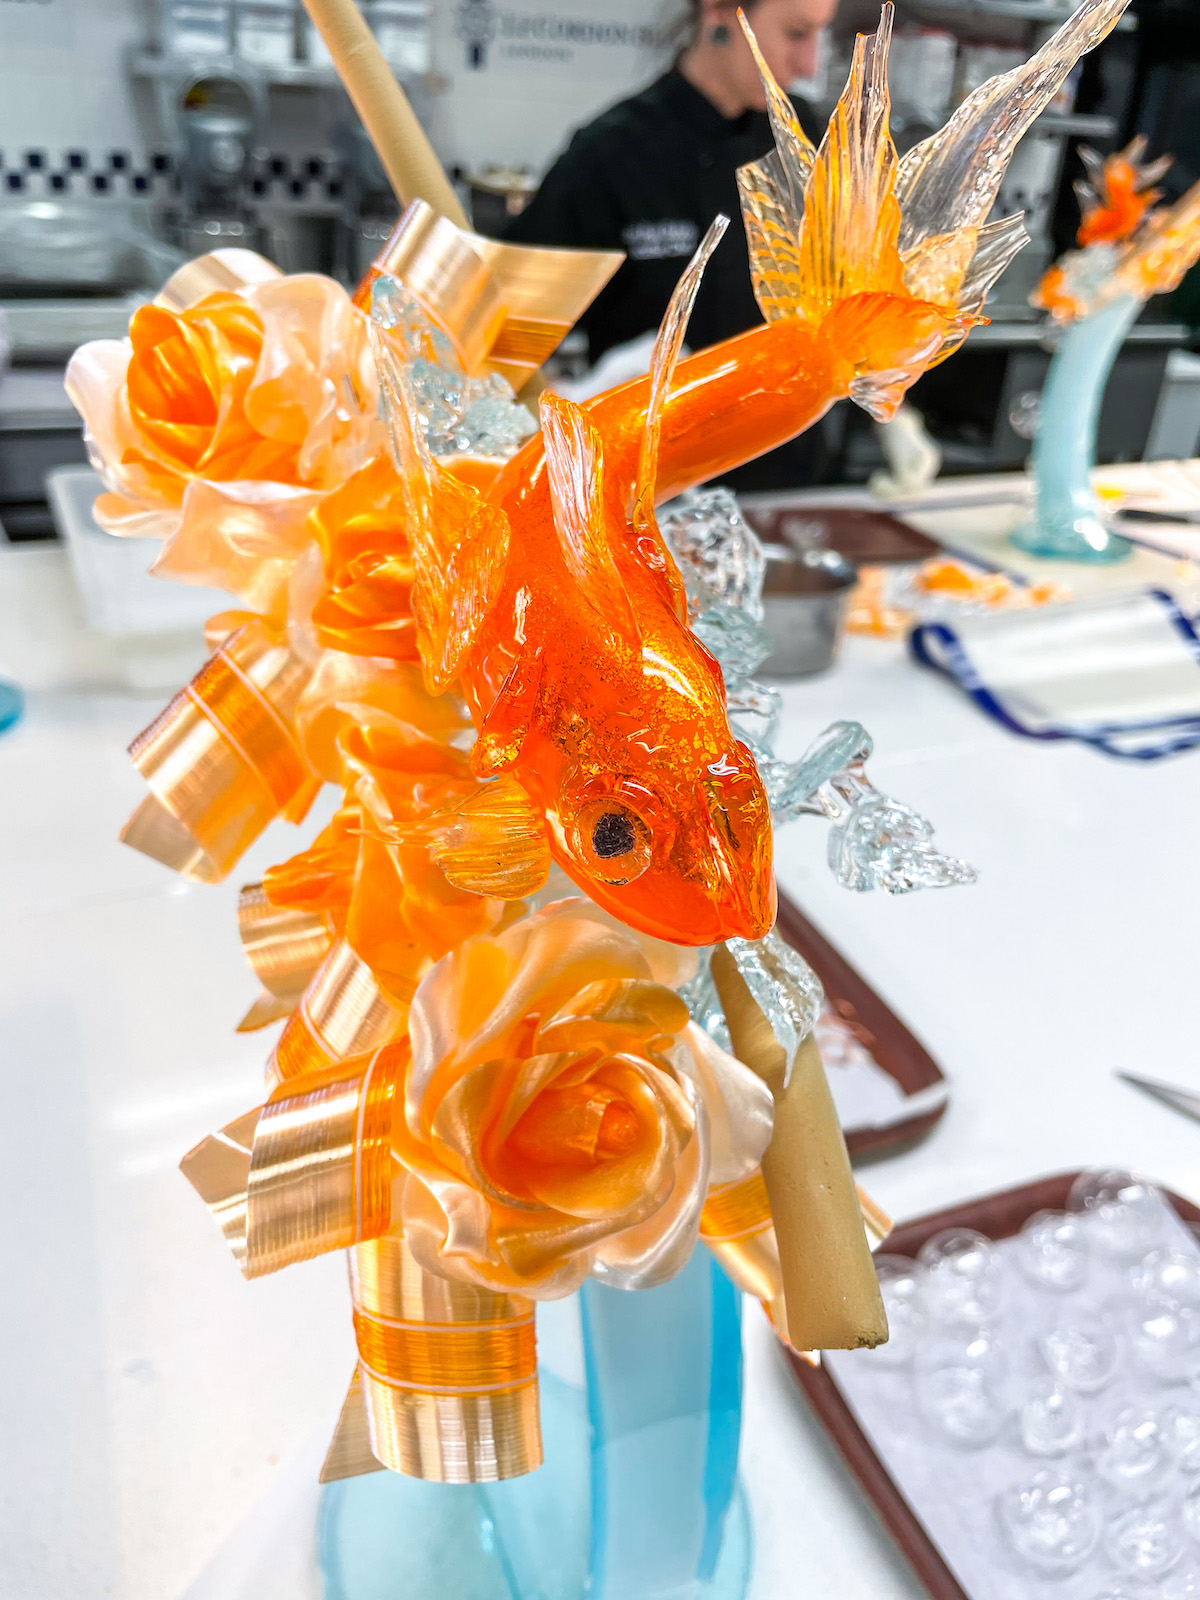 Fish themed sugar sculpture in a kitchen at Le Cordon Bleu London, with tools and sugar pieces surrounding it on the countertop